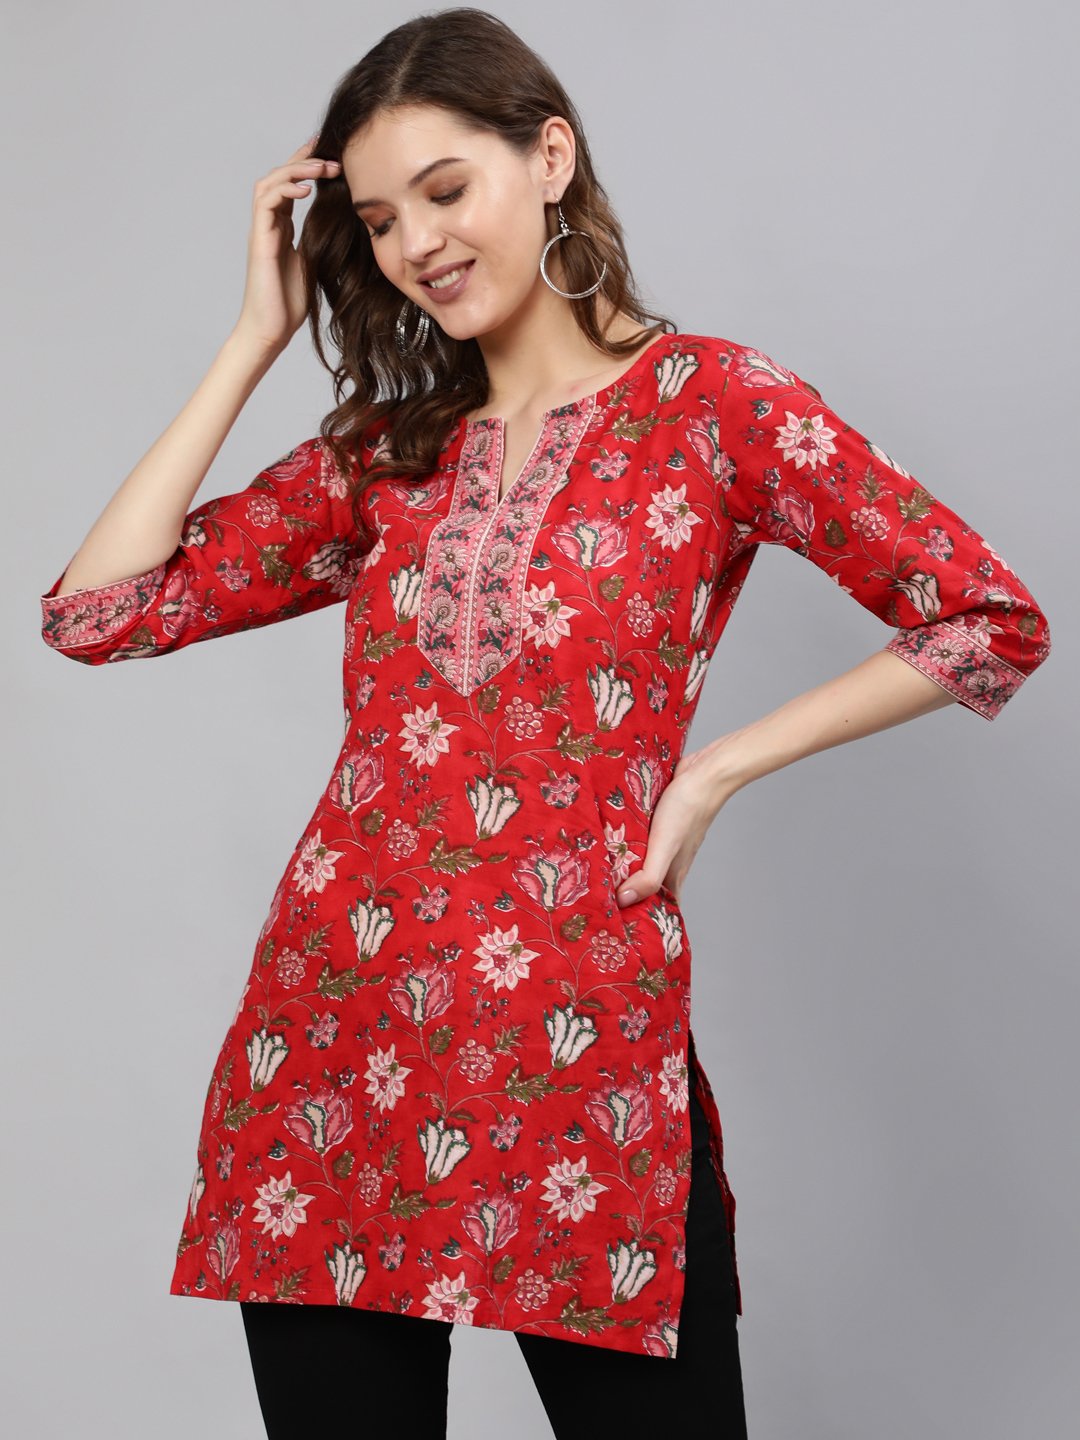 Women's Red Floral Printed Tunic With Three Quarter Sleeves - Nayo Clothing